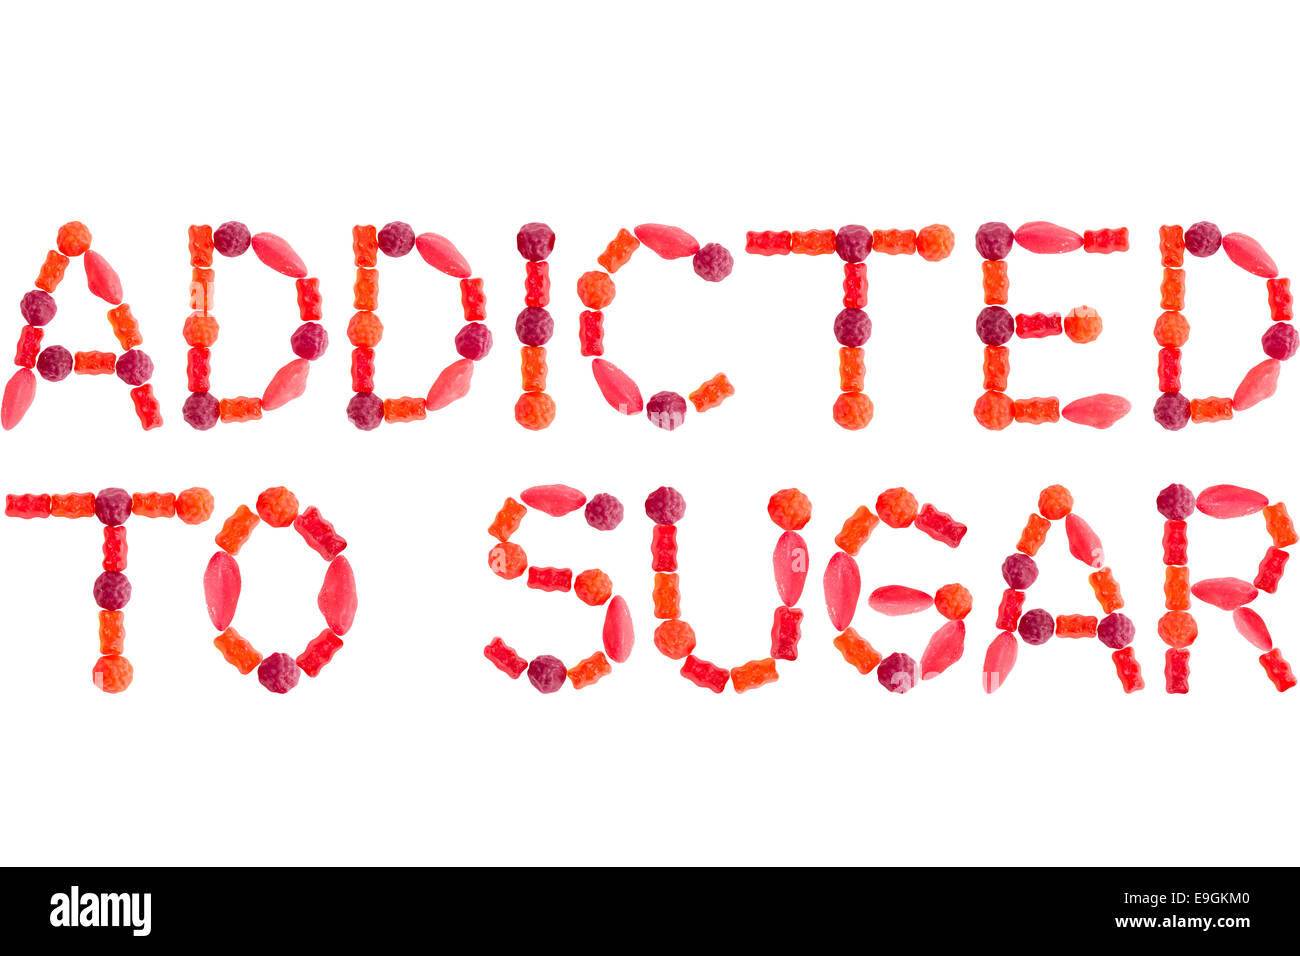 Phrase ADDICTED TO SUGAR made of red sugary candies, isolated on white background Stock Photo